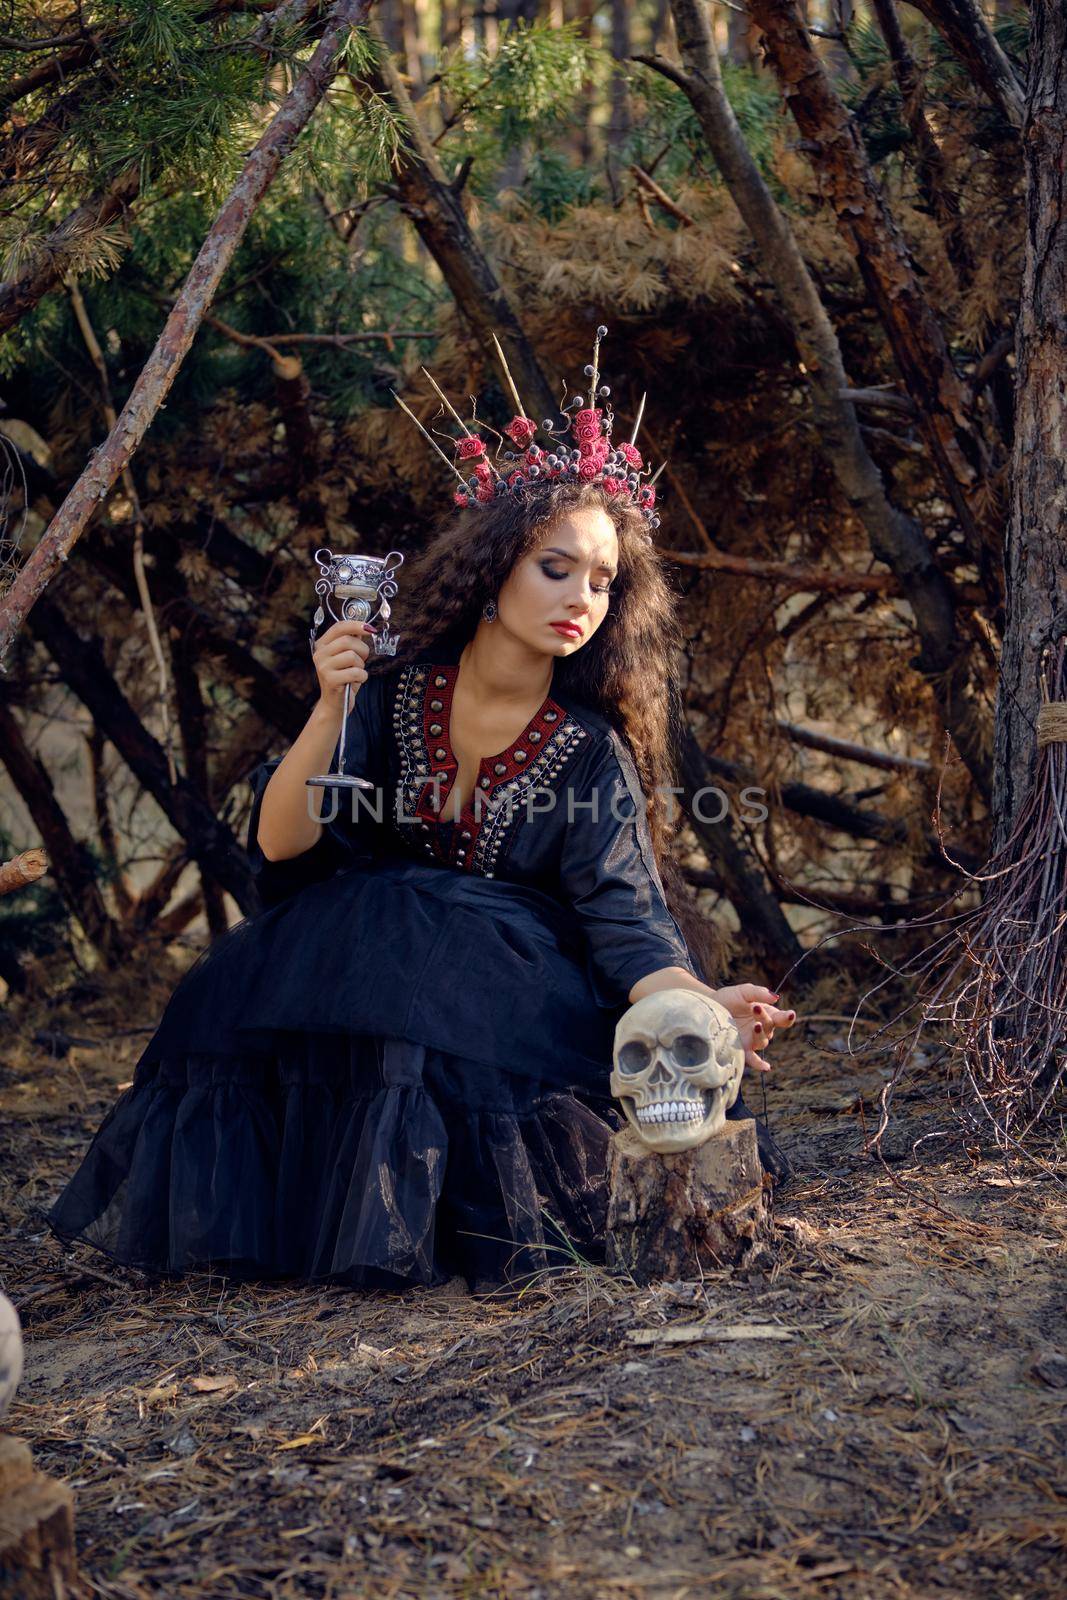 Beautiful, wicked, long-haired sibyl in a black, long embroidered dress. There is large red crown in her brown, curly hair. She is posing with her broom and a skull while sitting near a hut in a pine forest. Spells, magic and witchcraft. Full length portrait.